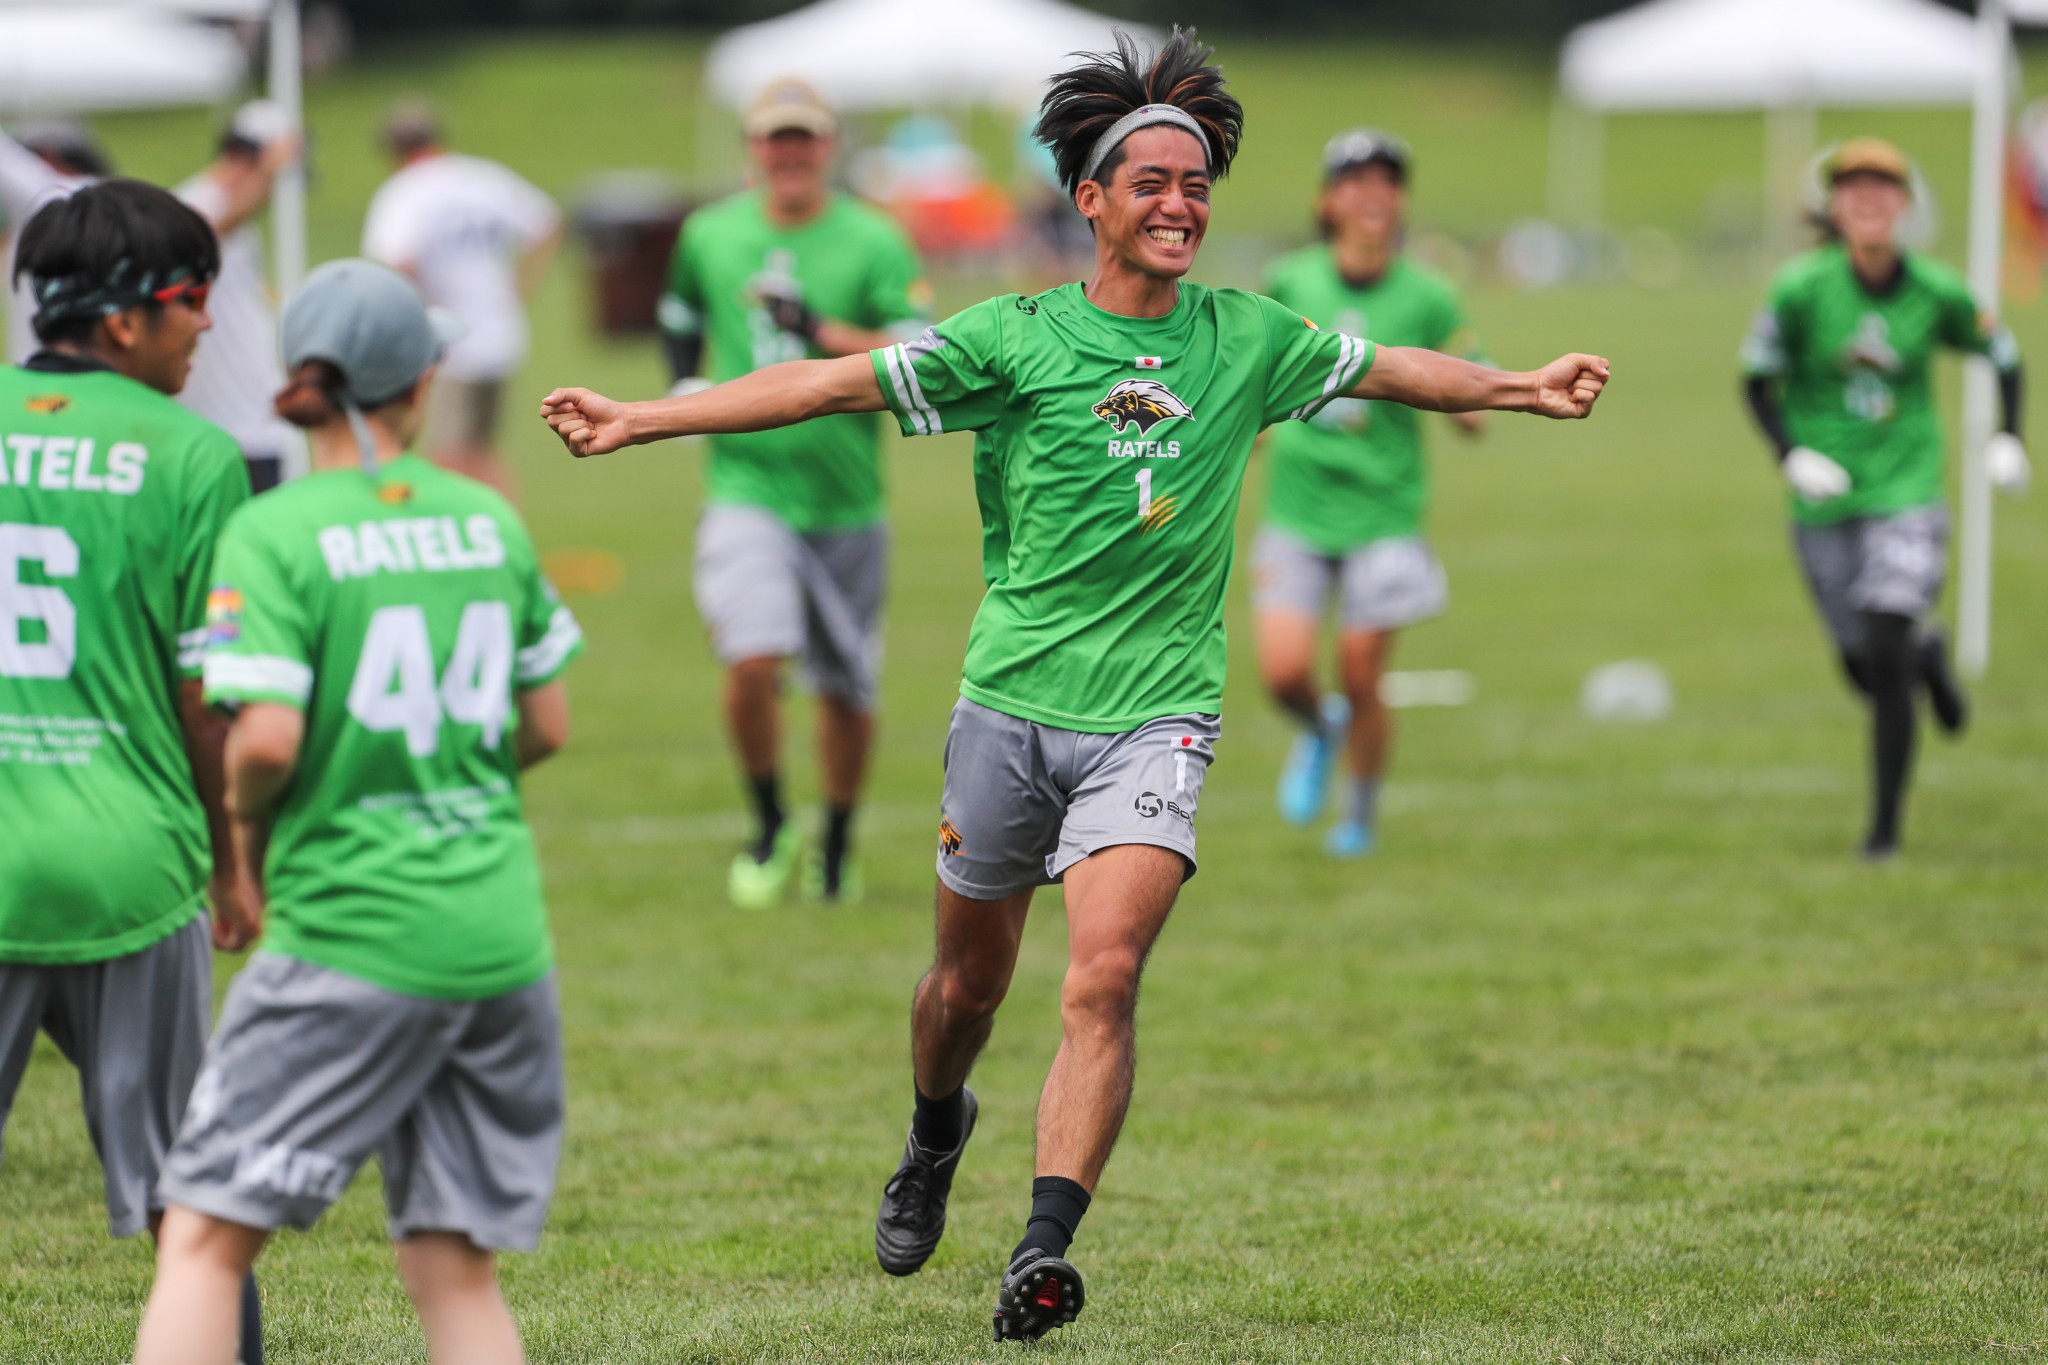 Ratels acheived back-to-back victories in Pool F of the mixed division to rise to third ©Paul Rutherford for UltiPhotos